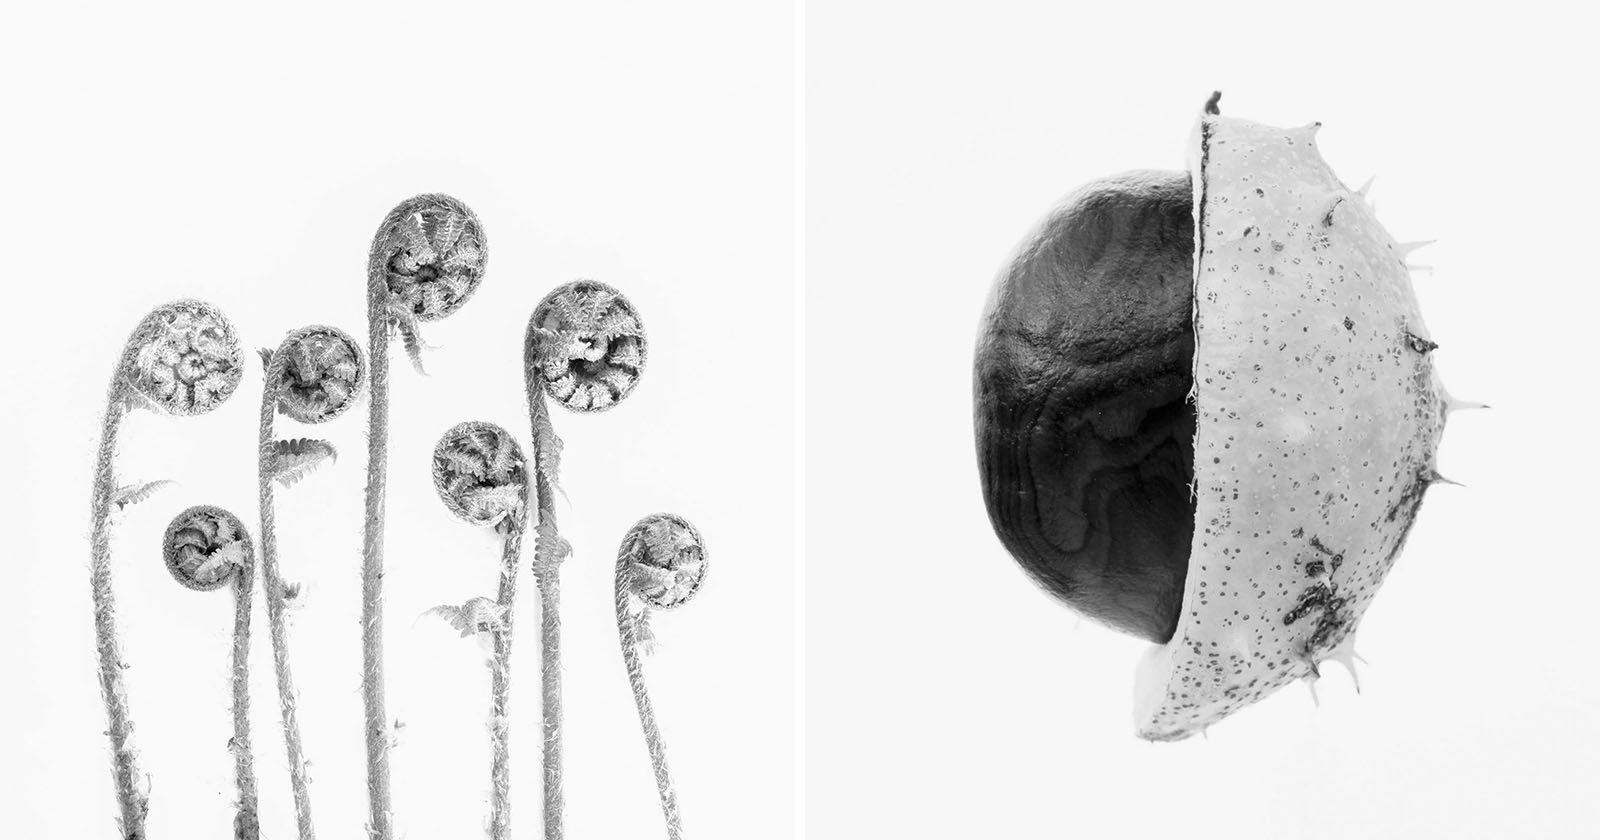 Botanical Studies Series Shows Beauty of Spiky, Round, and Edgy Things